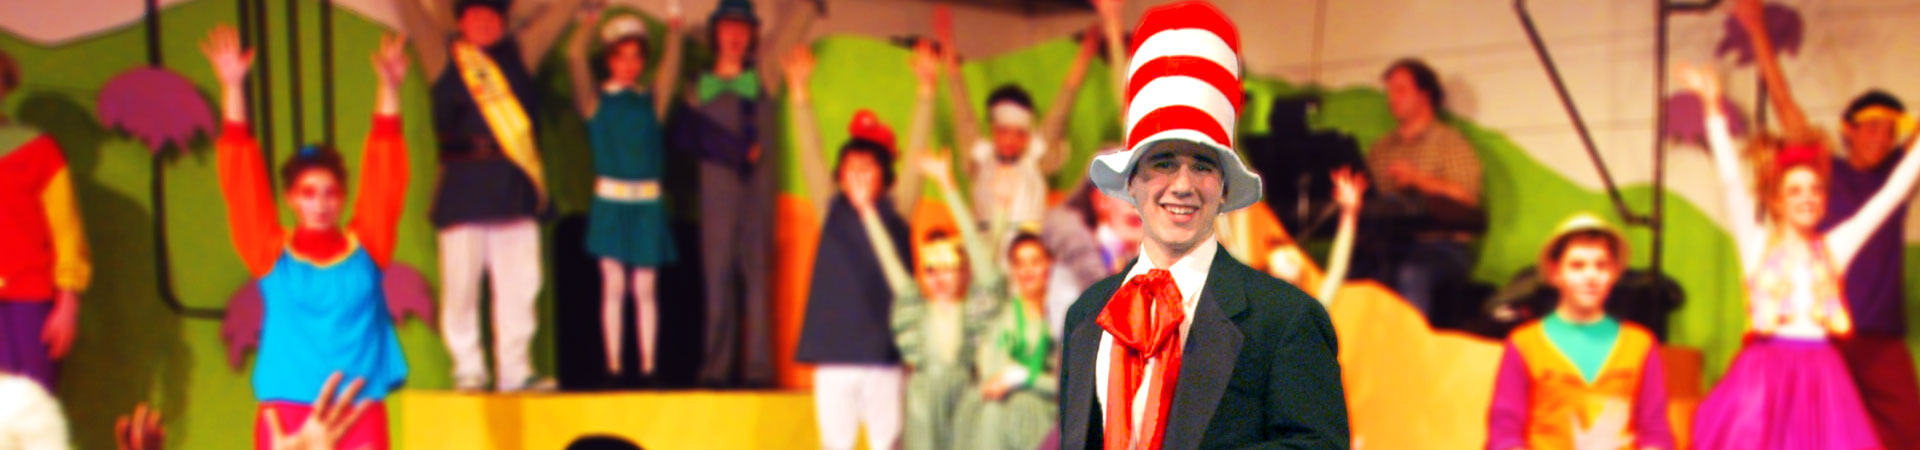 Seussical, the Musical is performed live at Studio East Training for the Performing Arts in Kirkland, WA. The Cat in the Hat is the focus. In the background, many young performers dressed in bright Whovian costumes raise their hands to the sky.